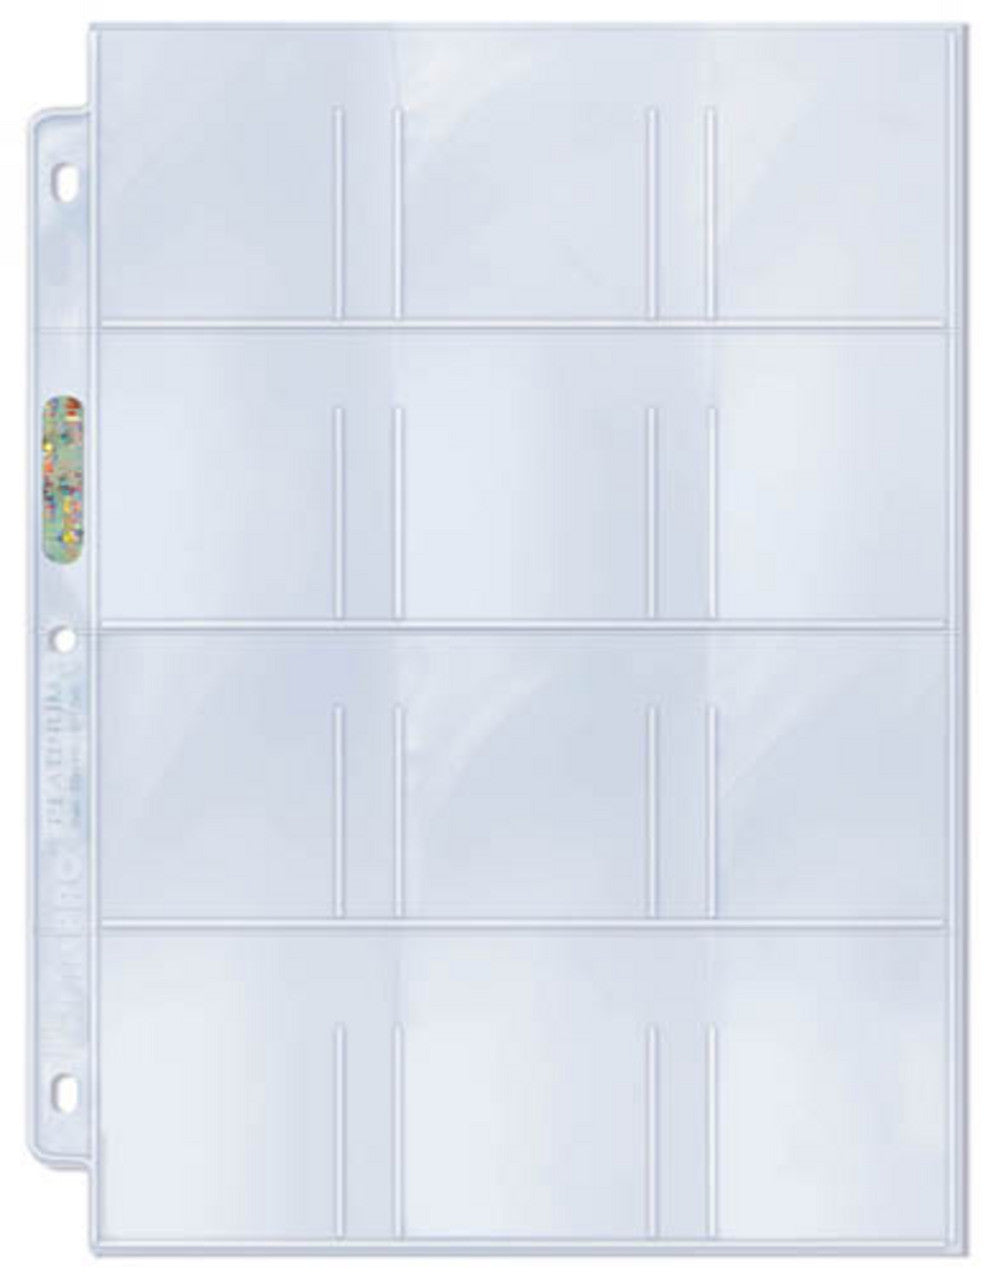 Ultra Pro 12 Pocket For Stickers (max 2 1/4 X 2 1/2) Pages (100ct)